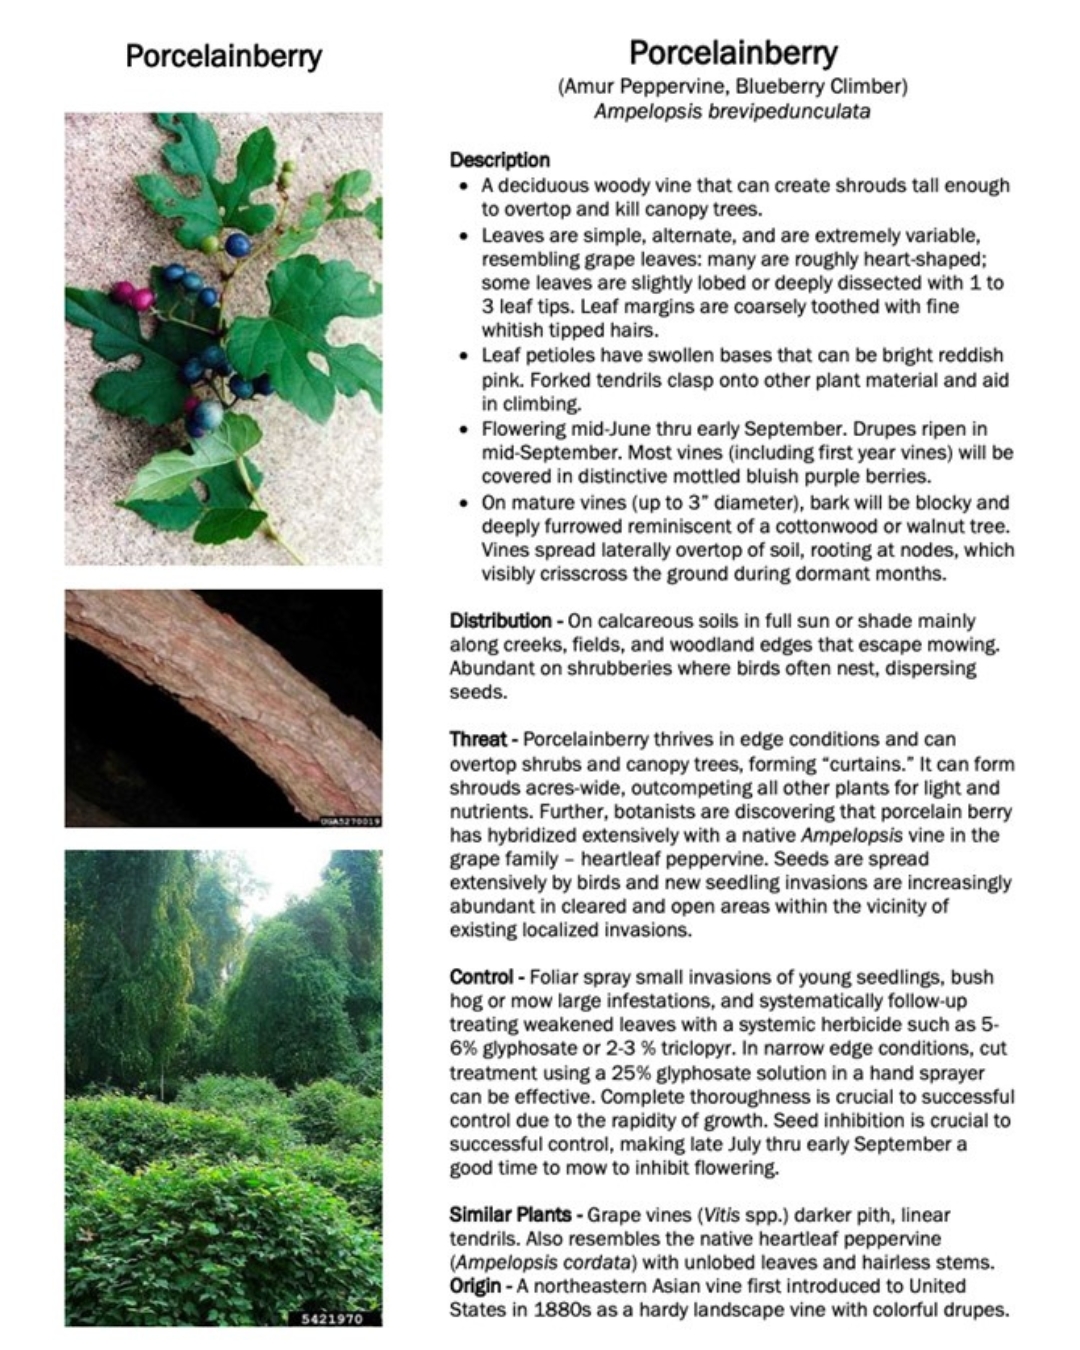 Invasive species guide for removing Porcelainberry